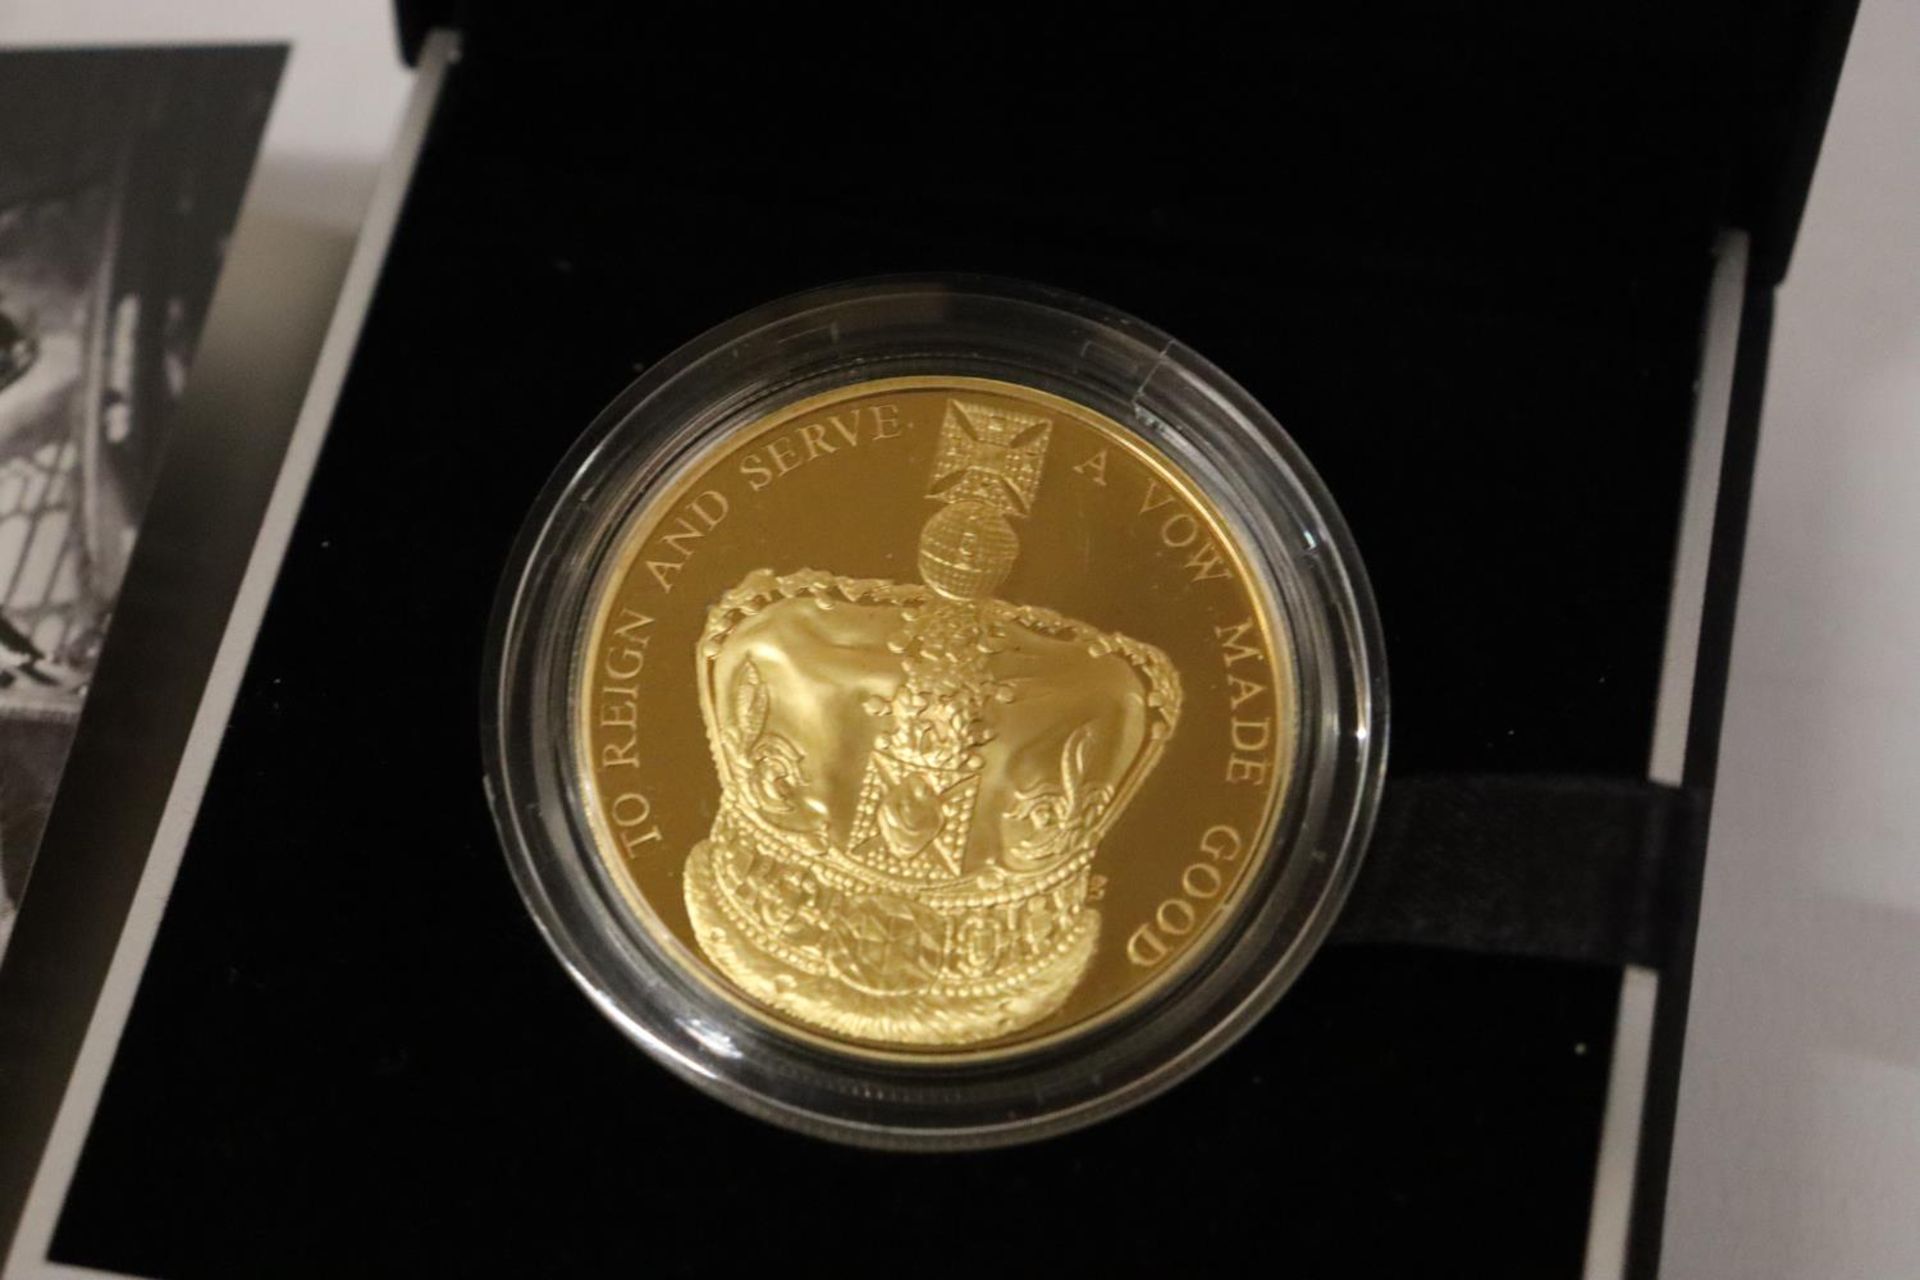 THE ROYAL MINT 2013 .925 AG PLATED WITH FINE GOLD . WEIGHT IS 28.28 GRMS THE 60TH ANNIVERSARY OF THE - Image 2 of 5